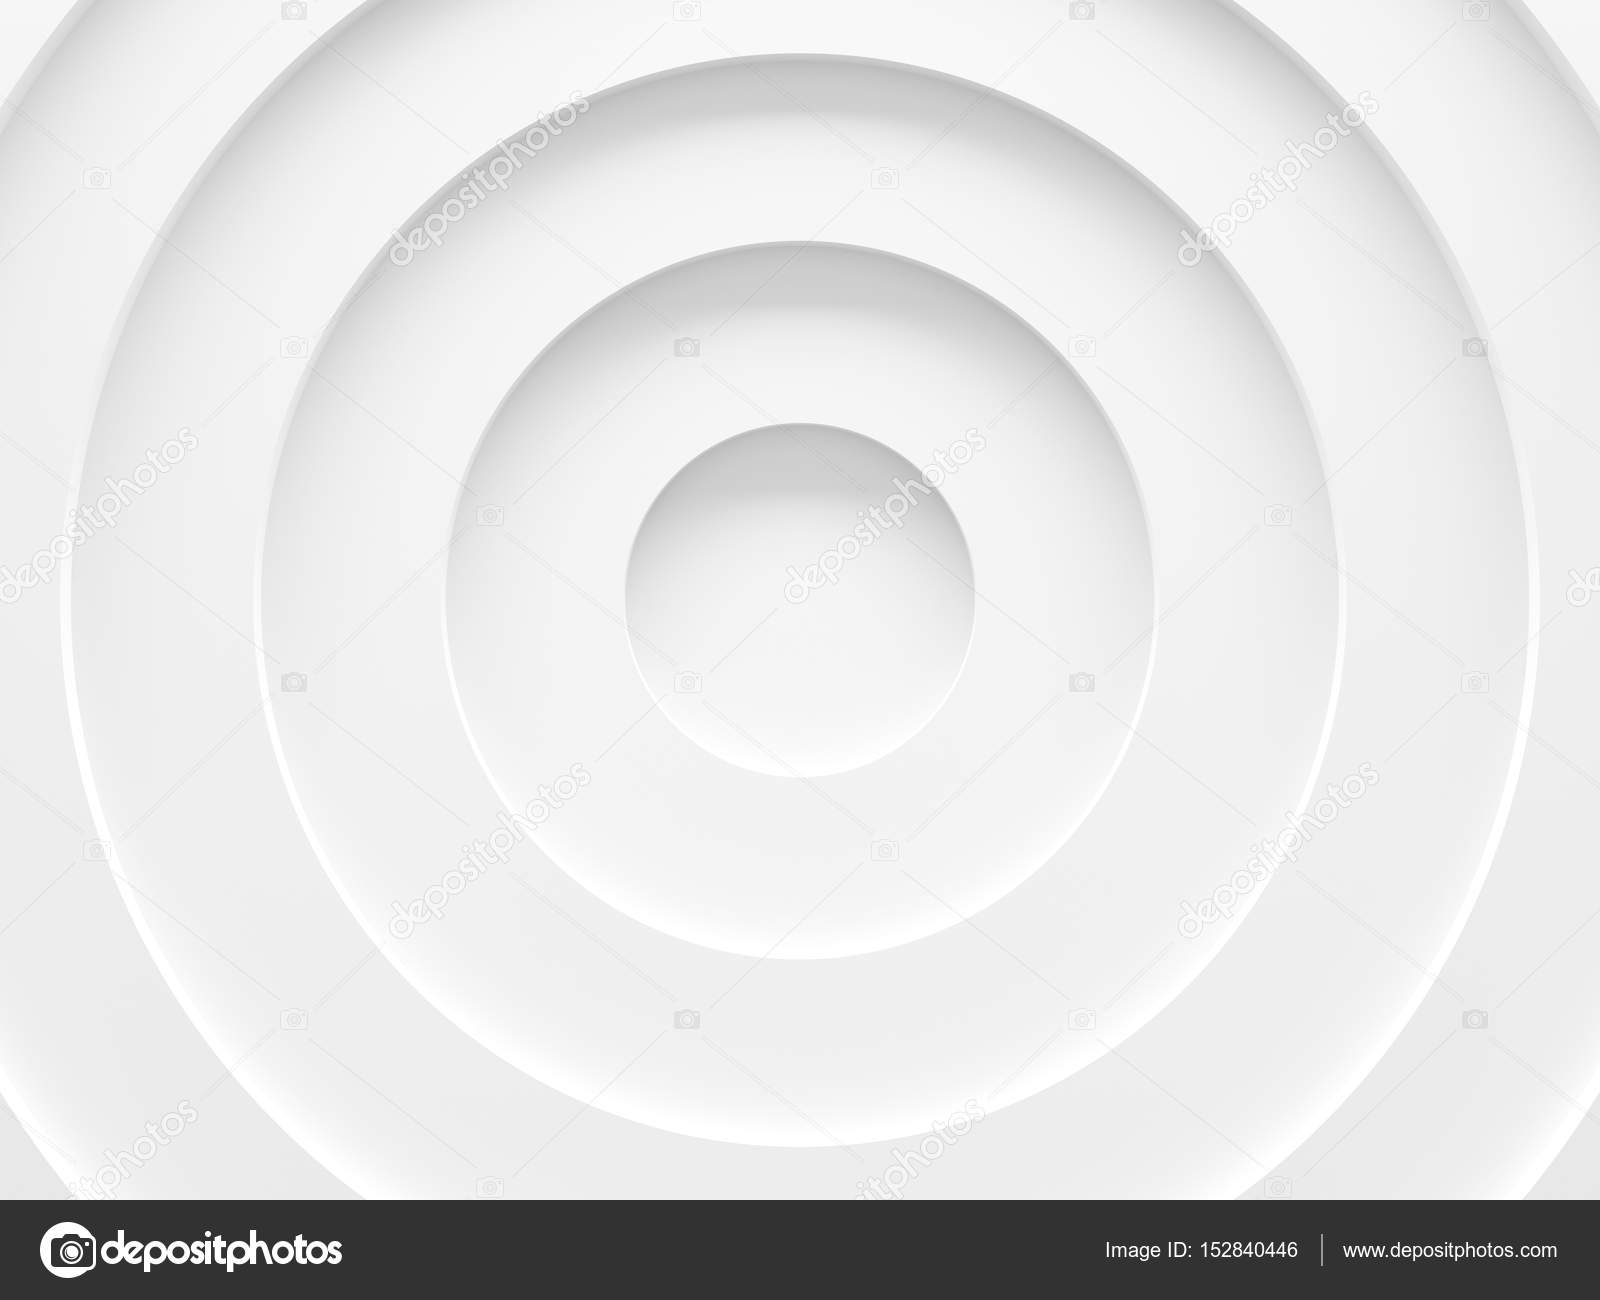 White circles abstract background. Simple and clean. Stock Photo by  ©serg036 152840446